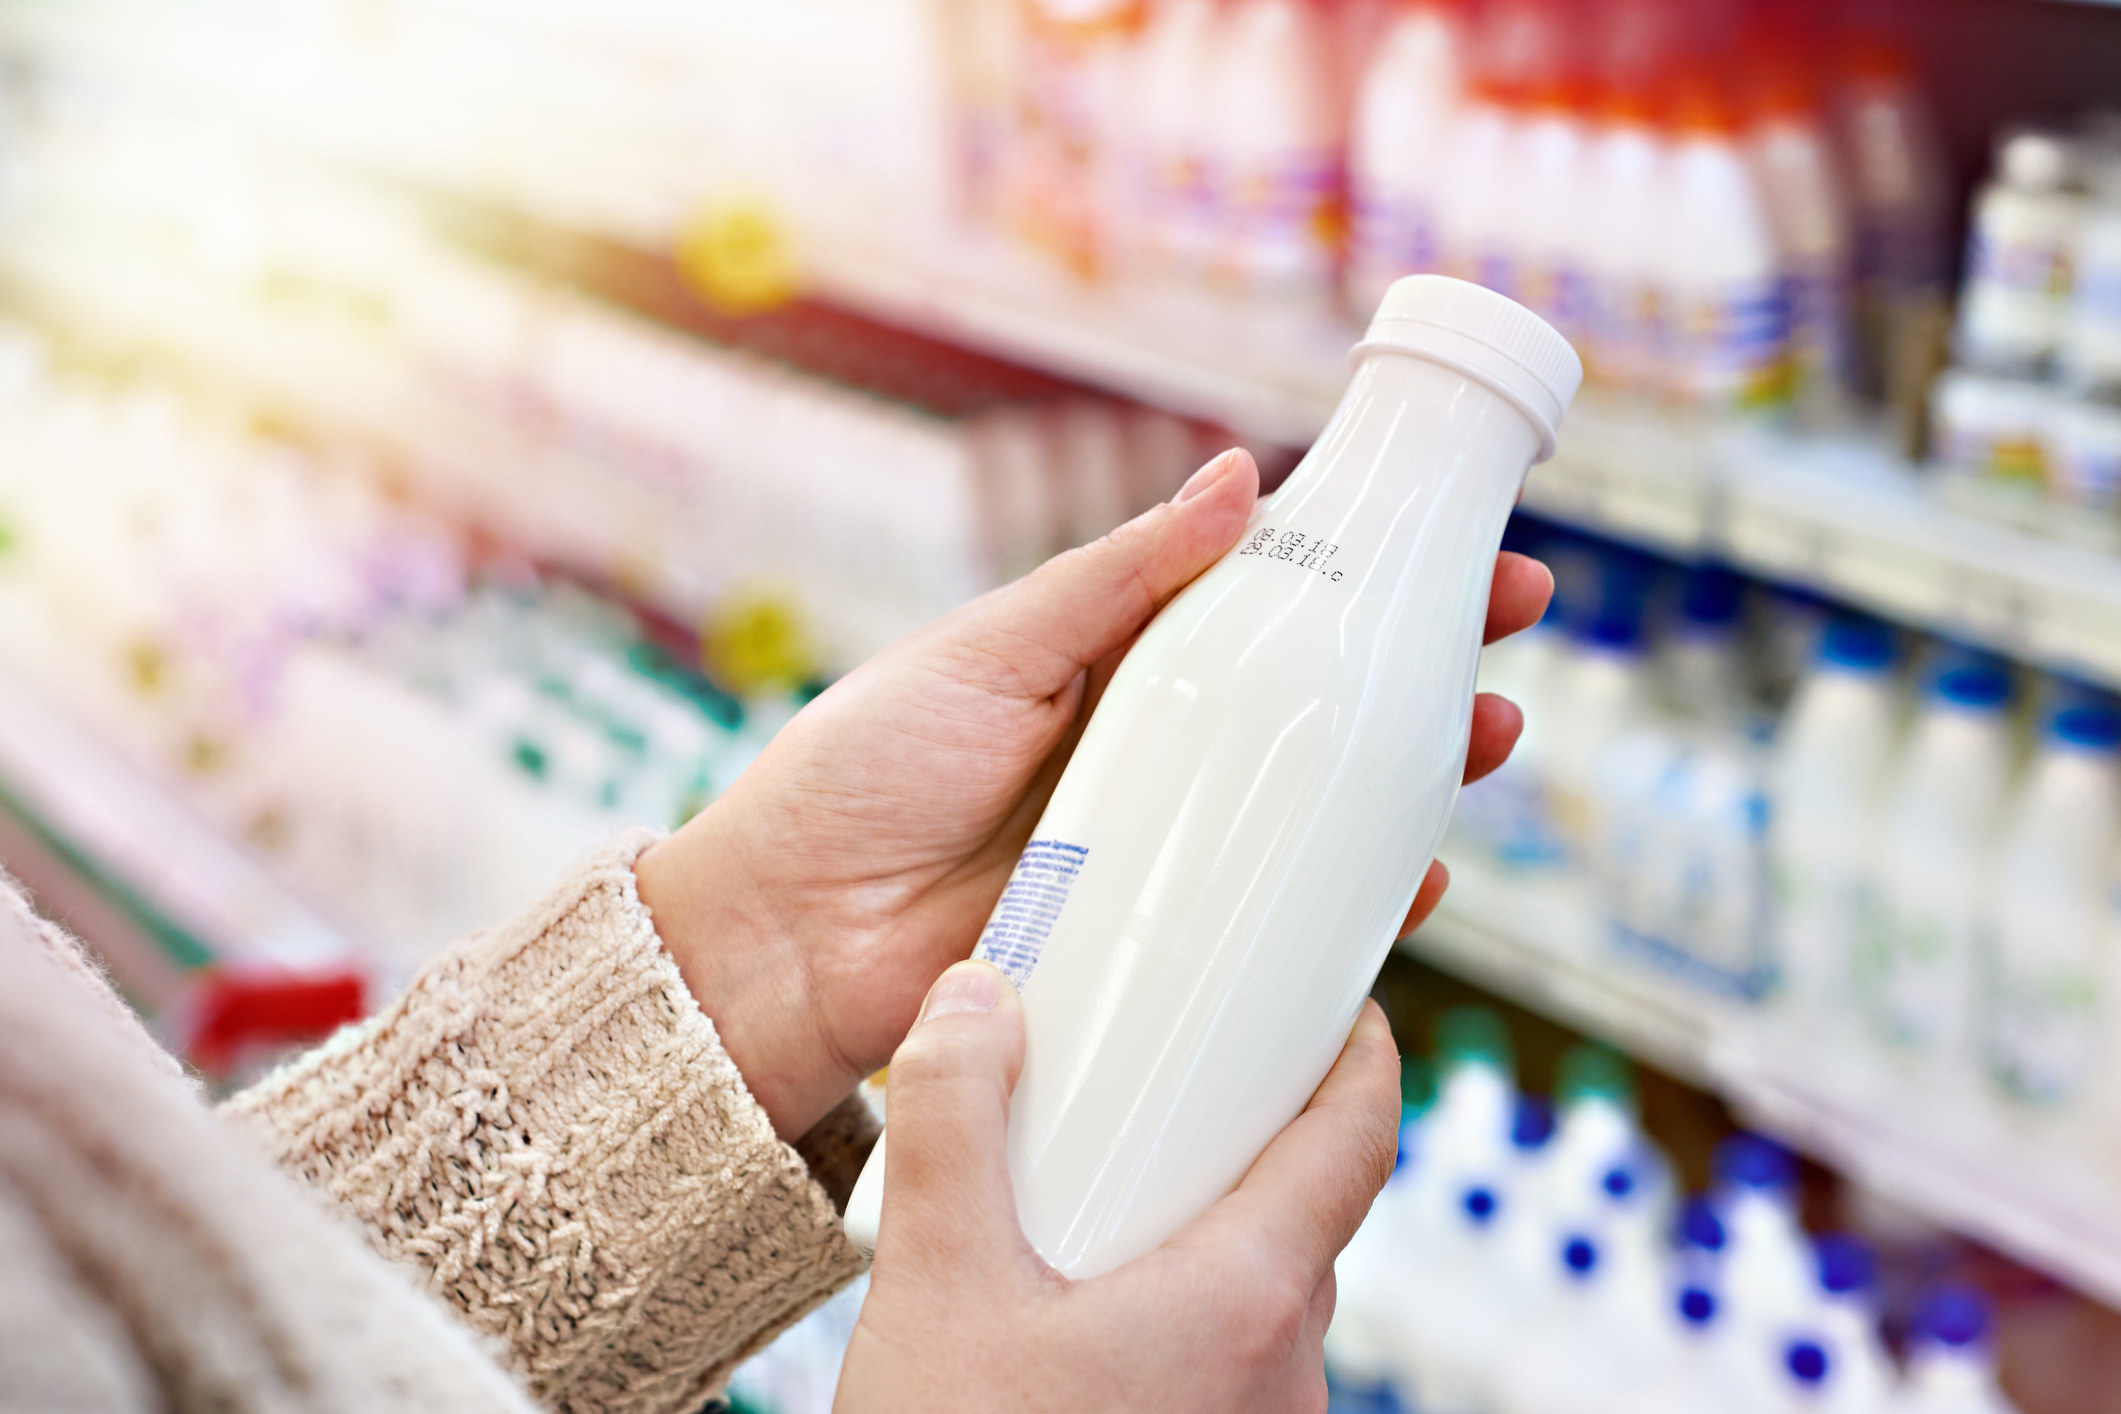 A woman examining a bottle of milk.